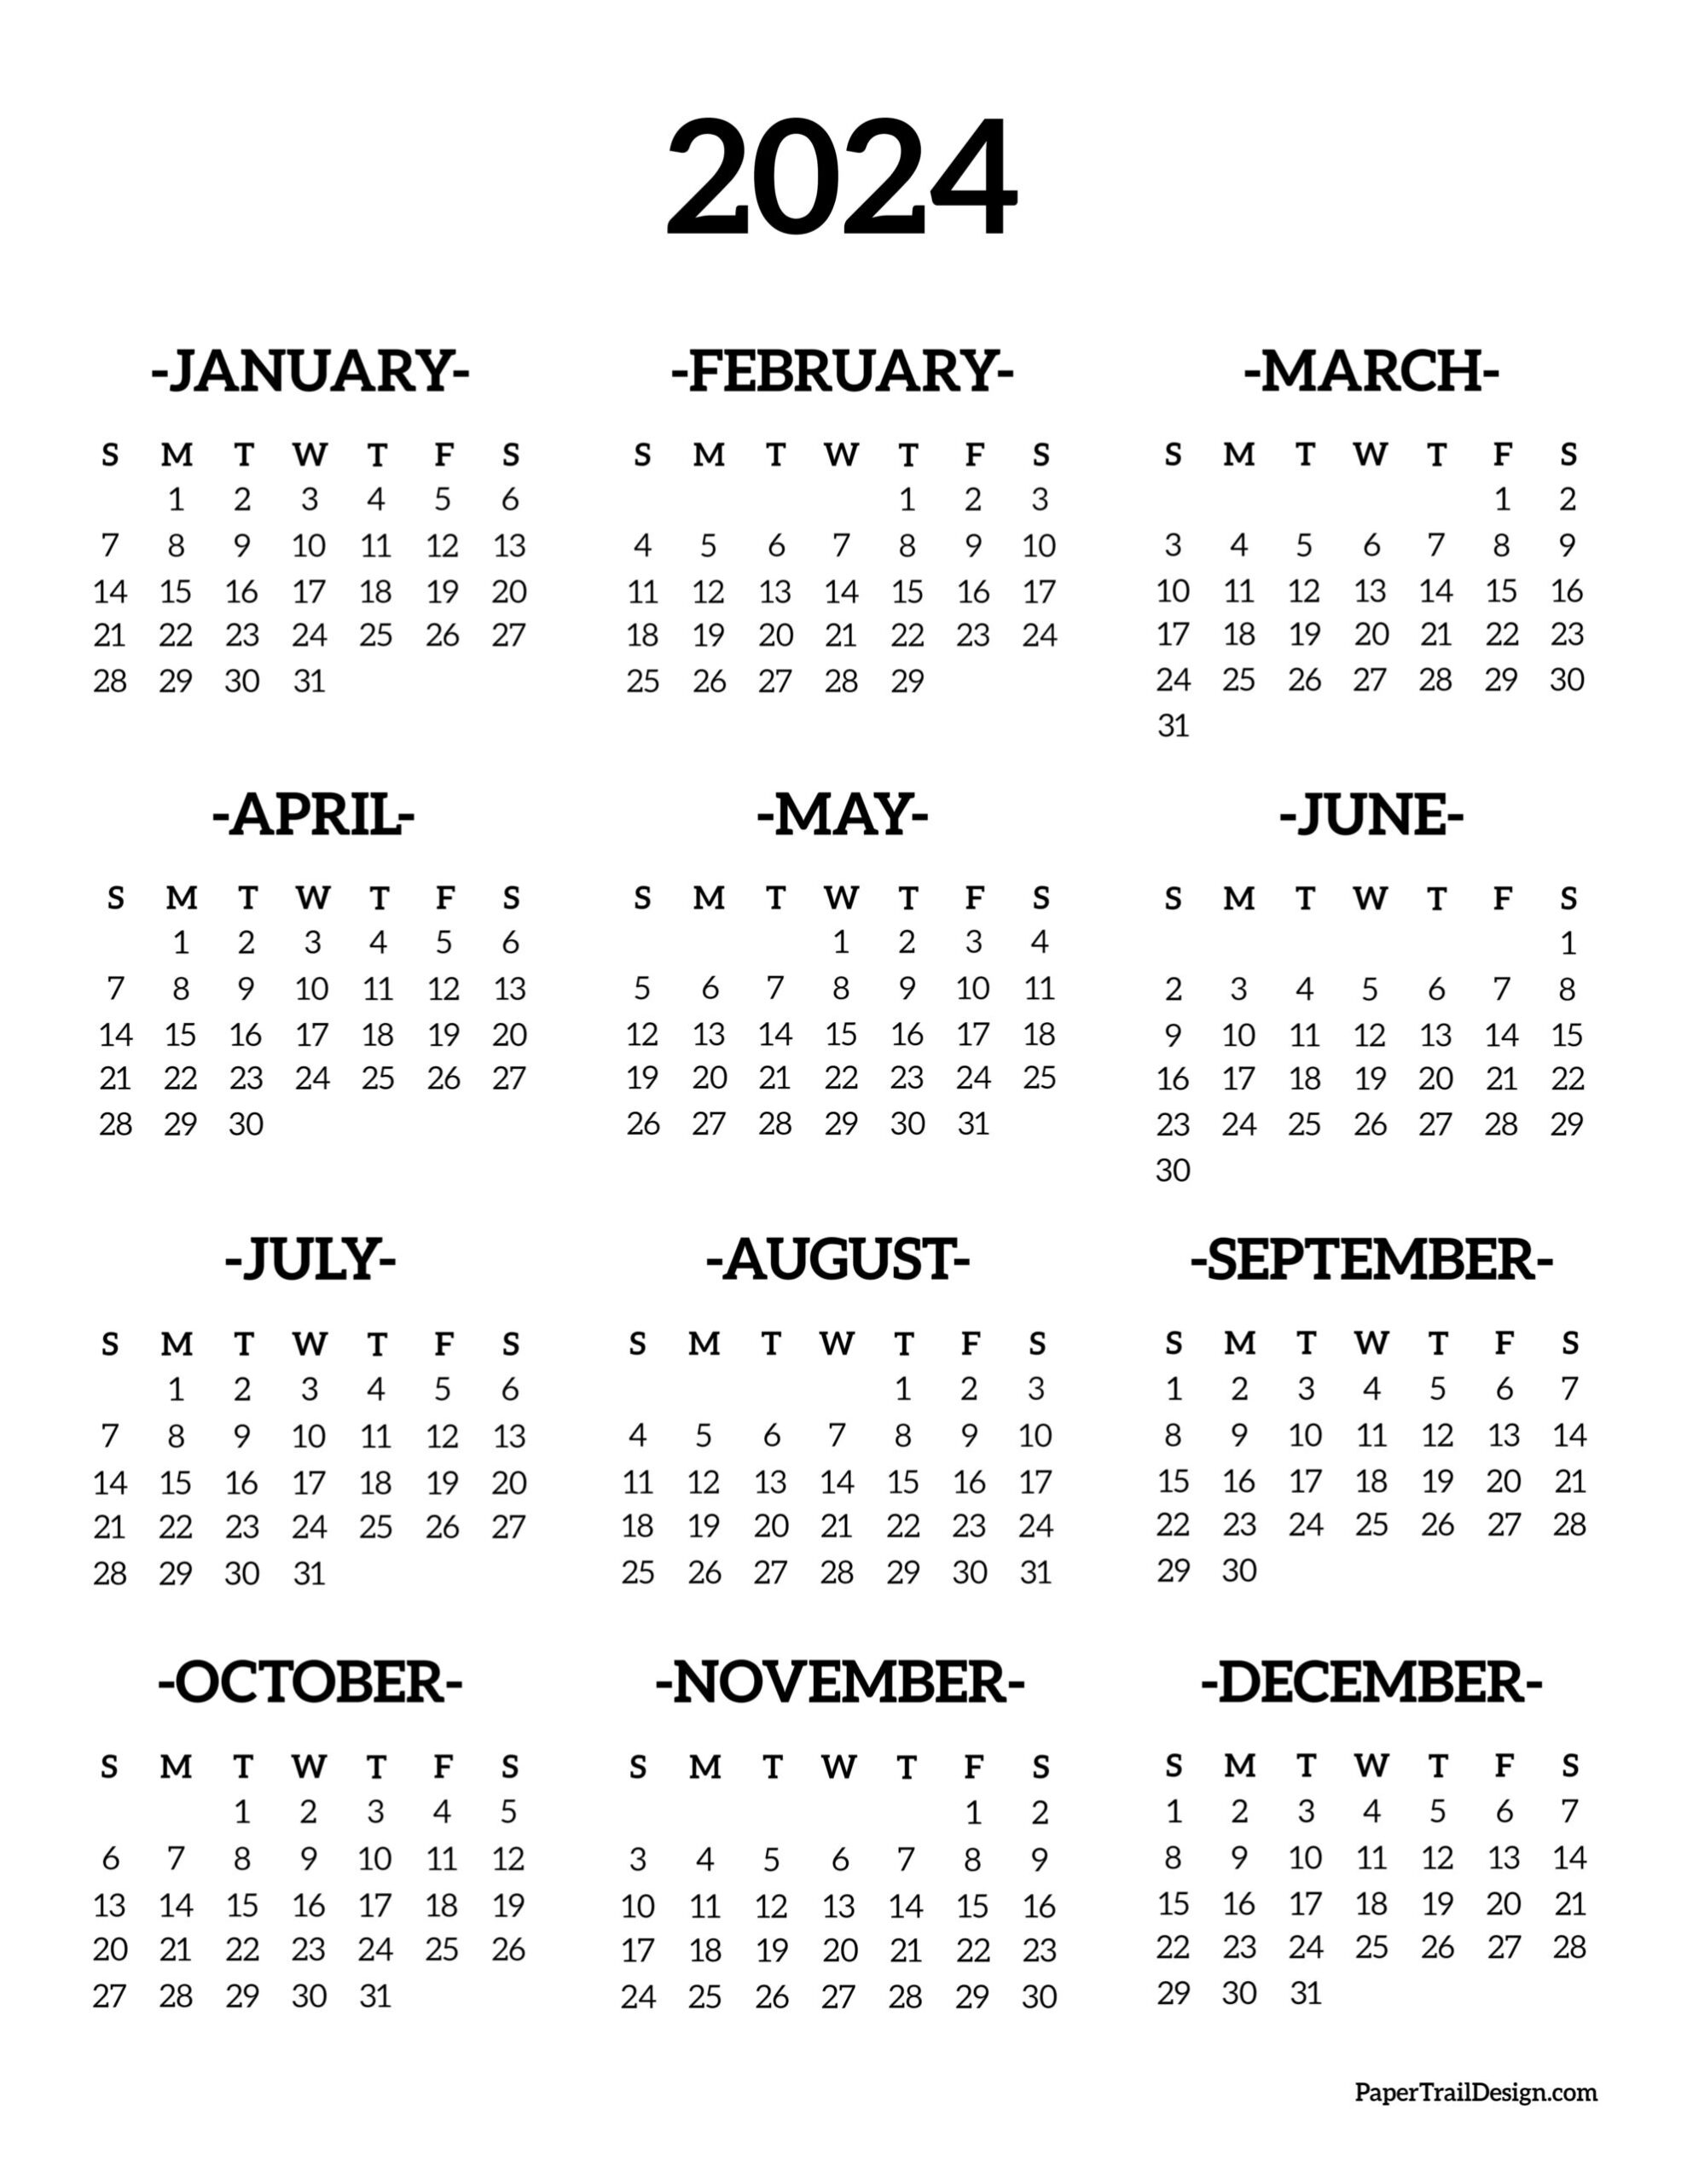 Calendar 2024 Printable One Page - Paper Trail Design | 2024 Yearly Calendar Template